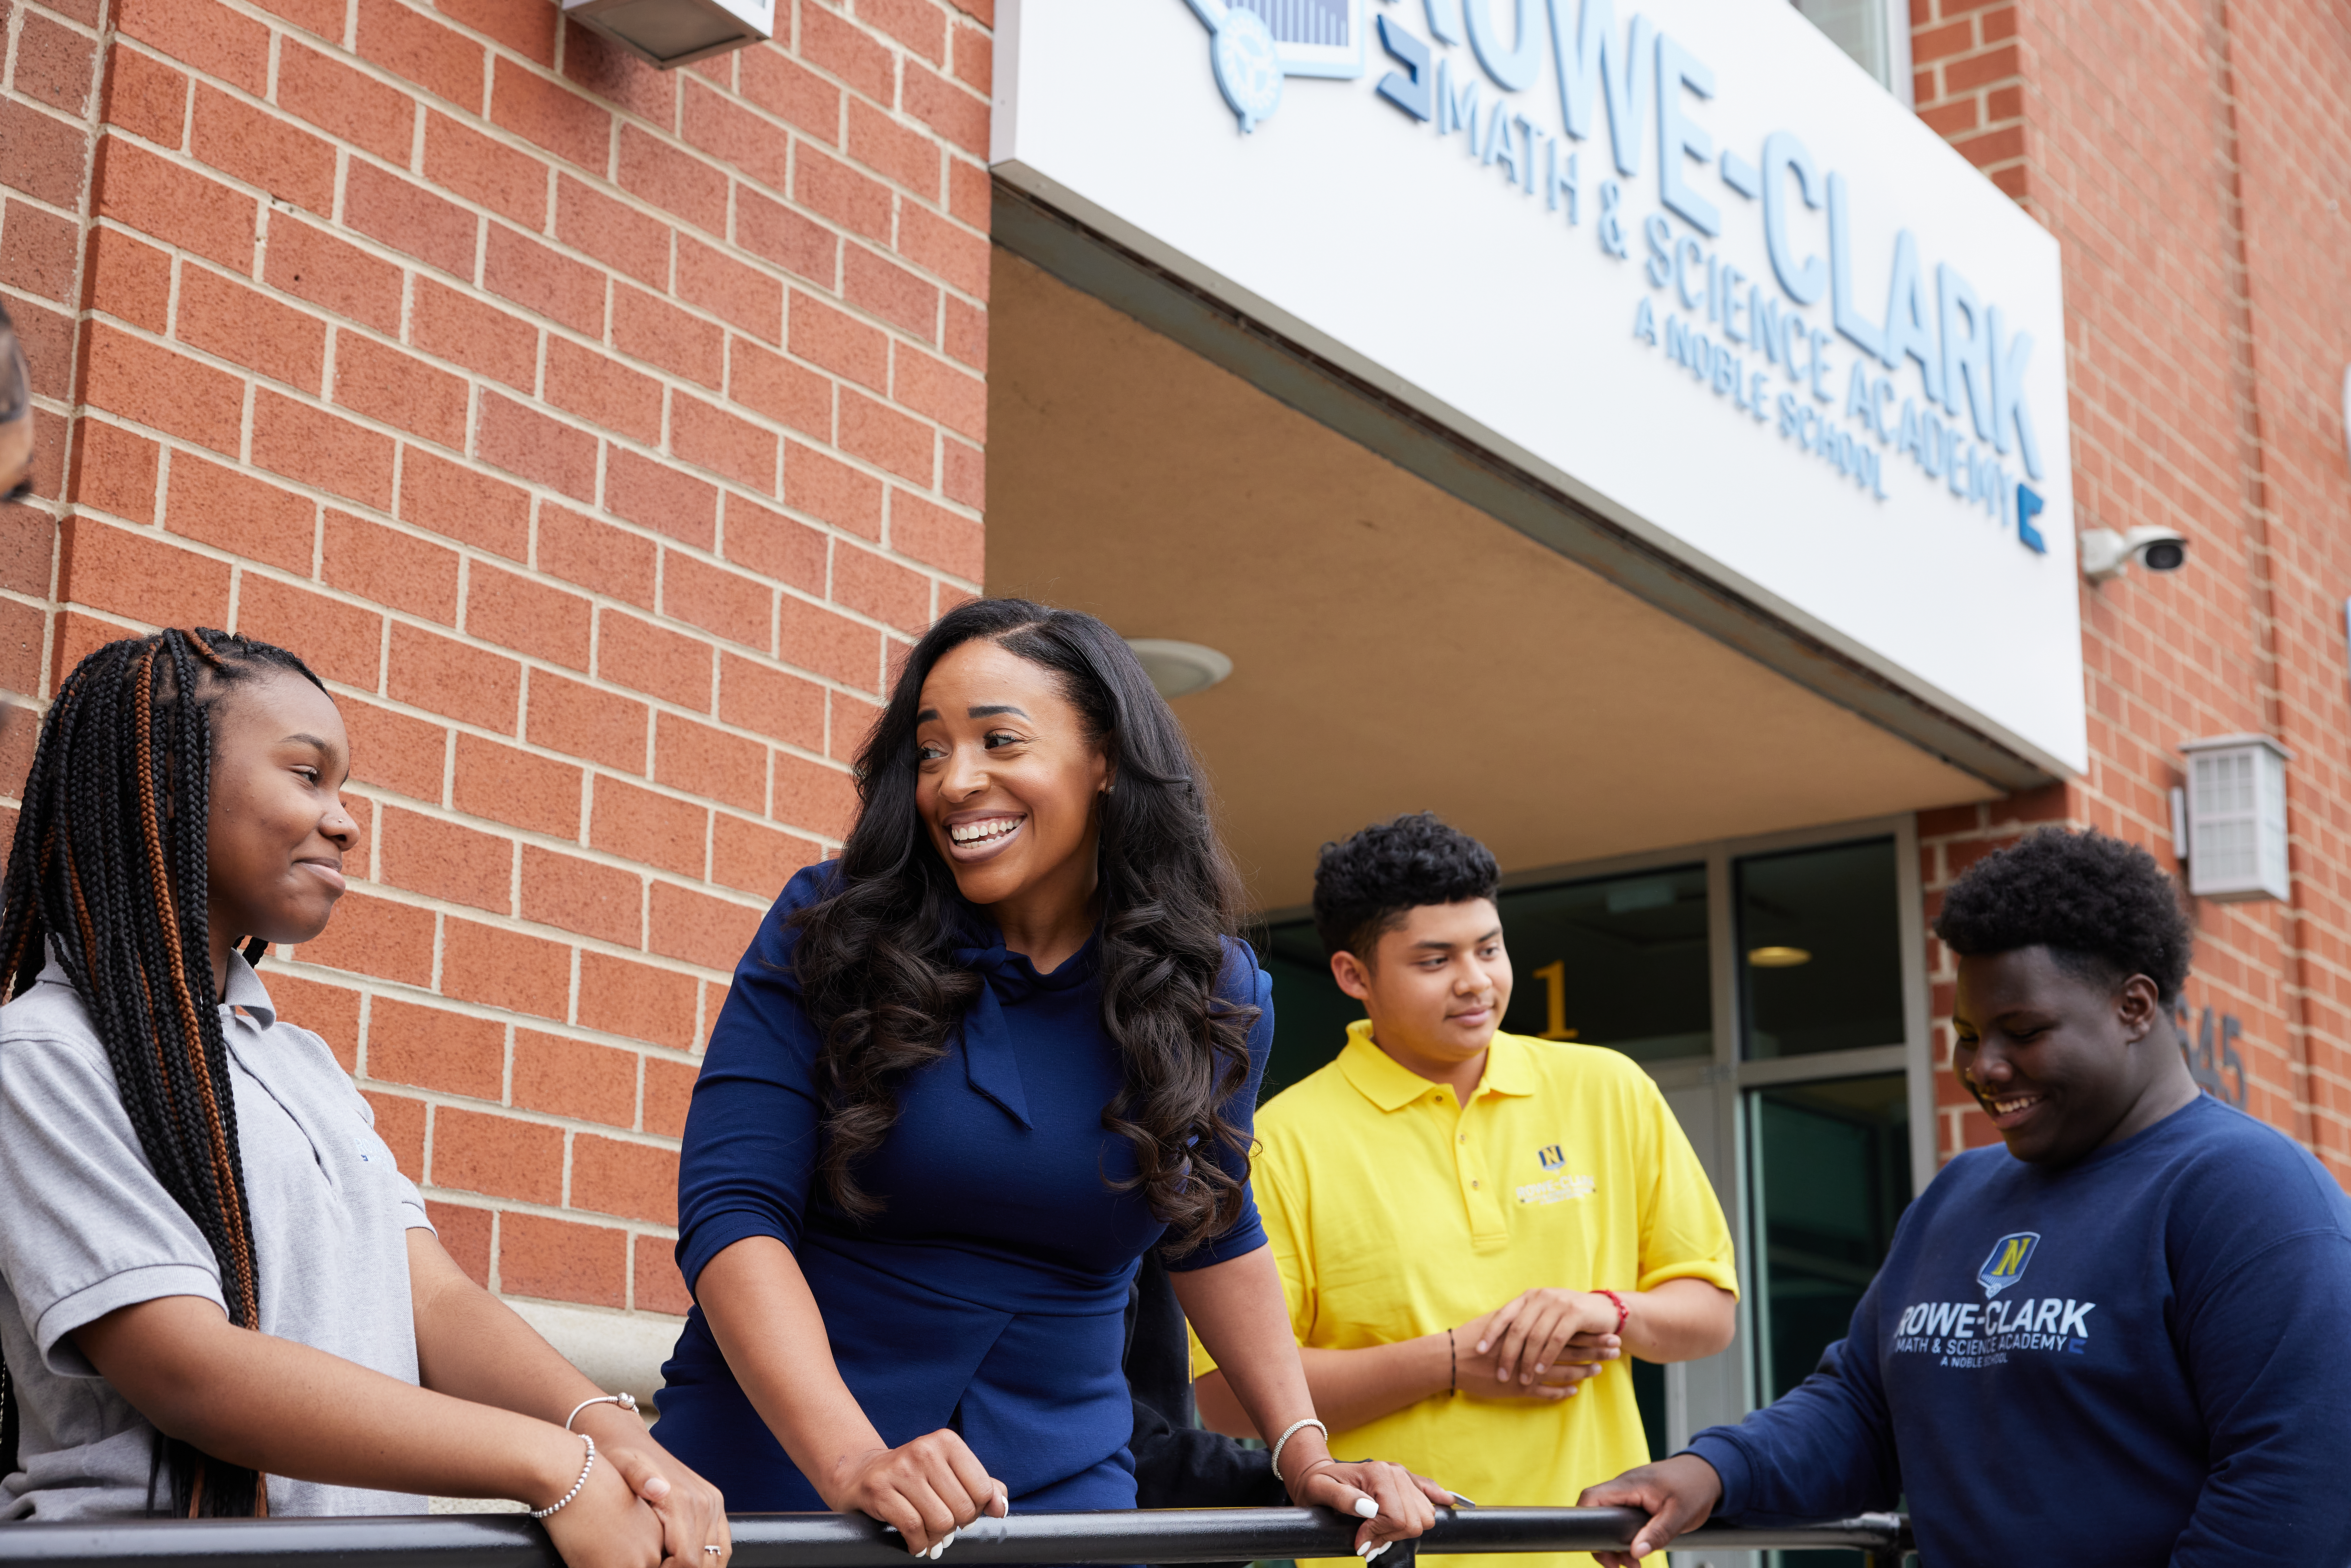 Photo shows Principal Moss talking with three students outside the front entrance of Rowe-Clark Math and Science Academy. They are all smiling and looking at each other like they are in a good conversation. You can see the Rowe-Clark sign in the background.